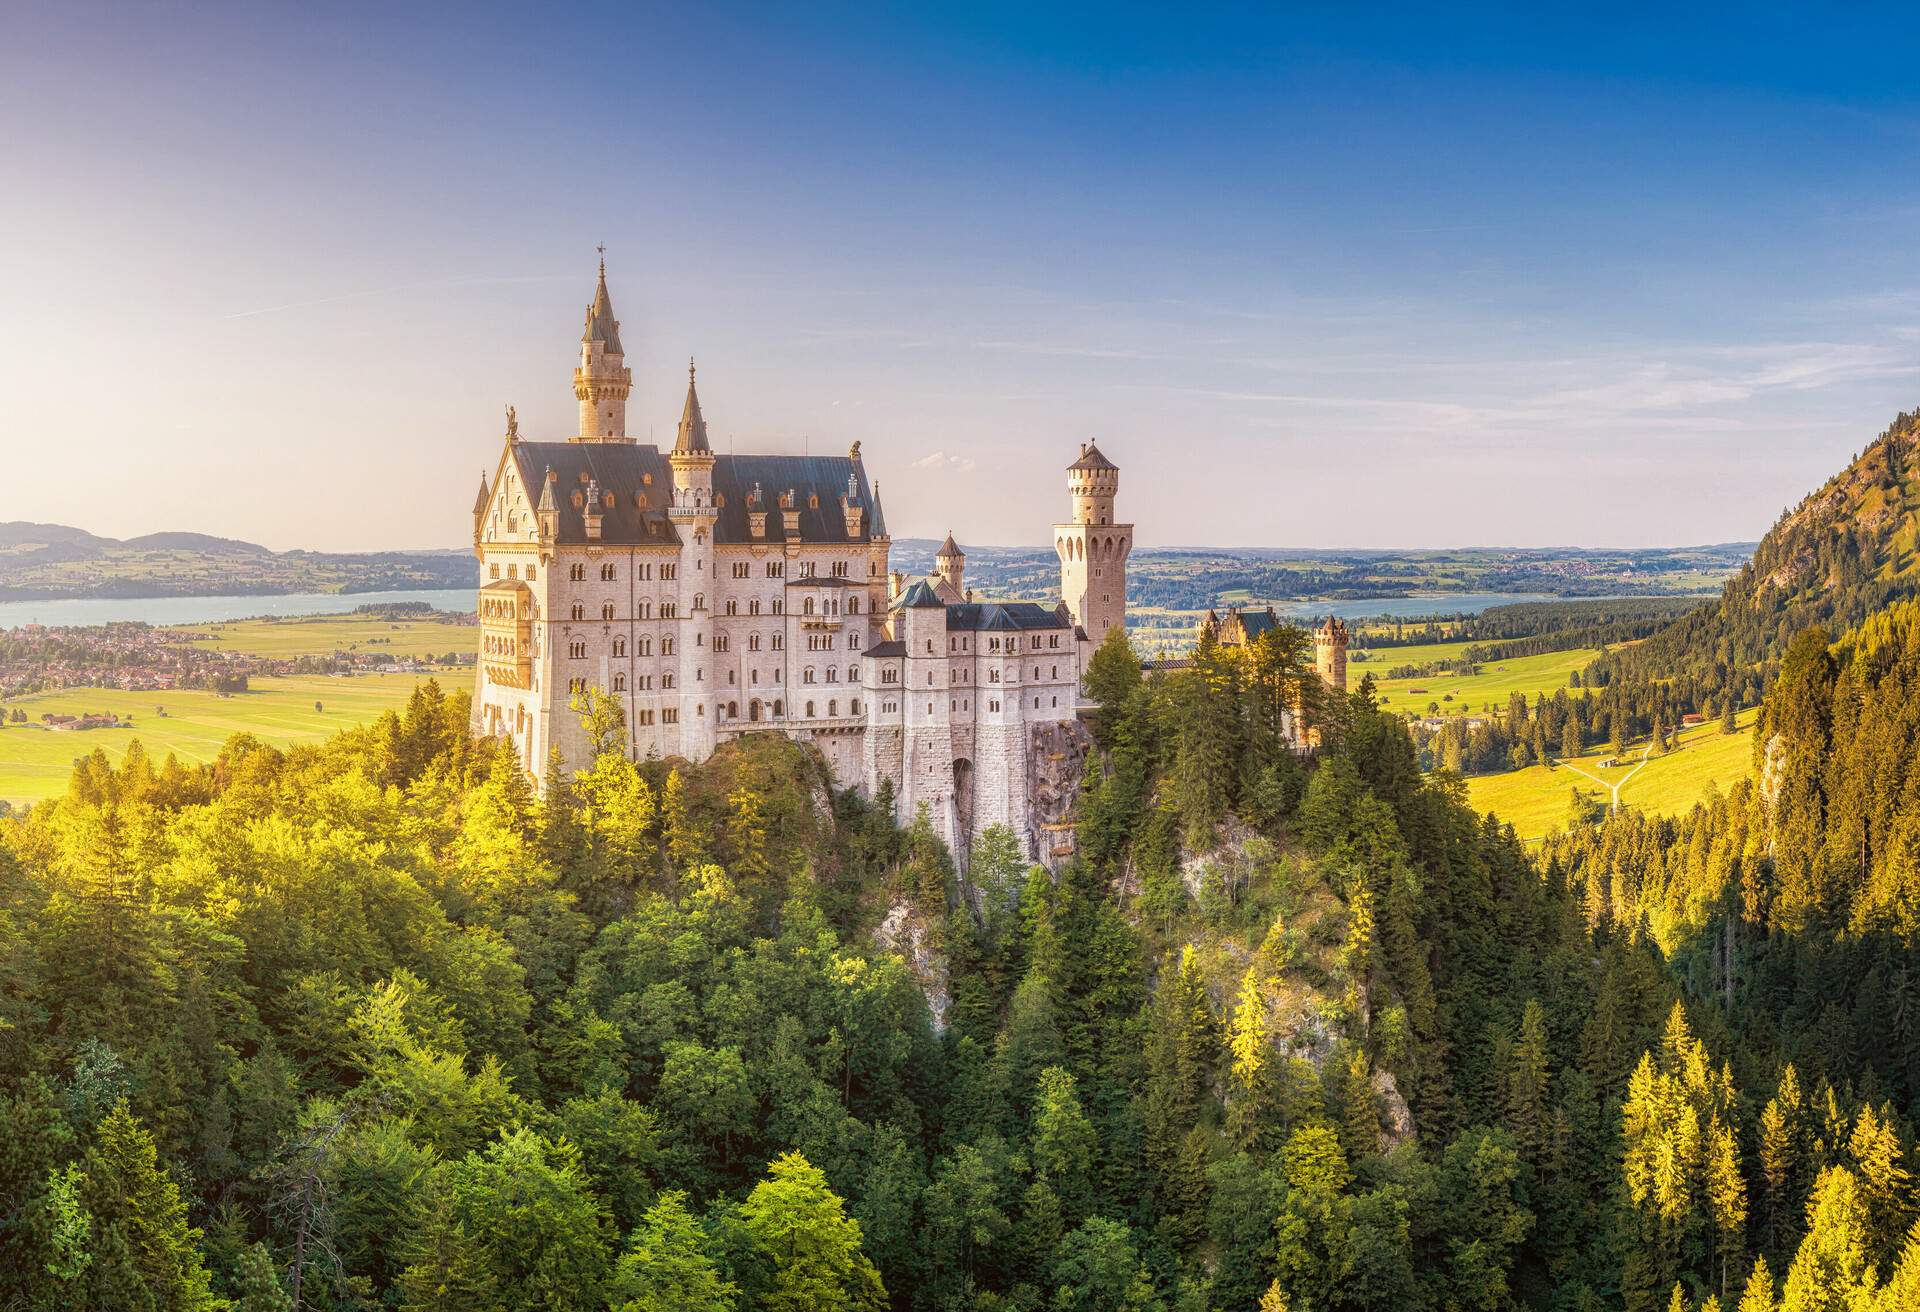 Beautiful view of world-famous Neuschwanstein Castle, the 19th century Romanesque Revival palace built for King Ludwig II, in beautiful evening light at sunset, Fussen, southwest Bavaria, Germany; Shutterstock ID 428991871; Purpose: Newsletter; Brand (KAYAK, Momondo, Any): Any